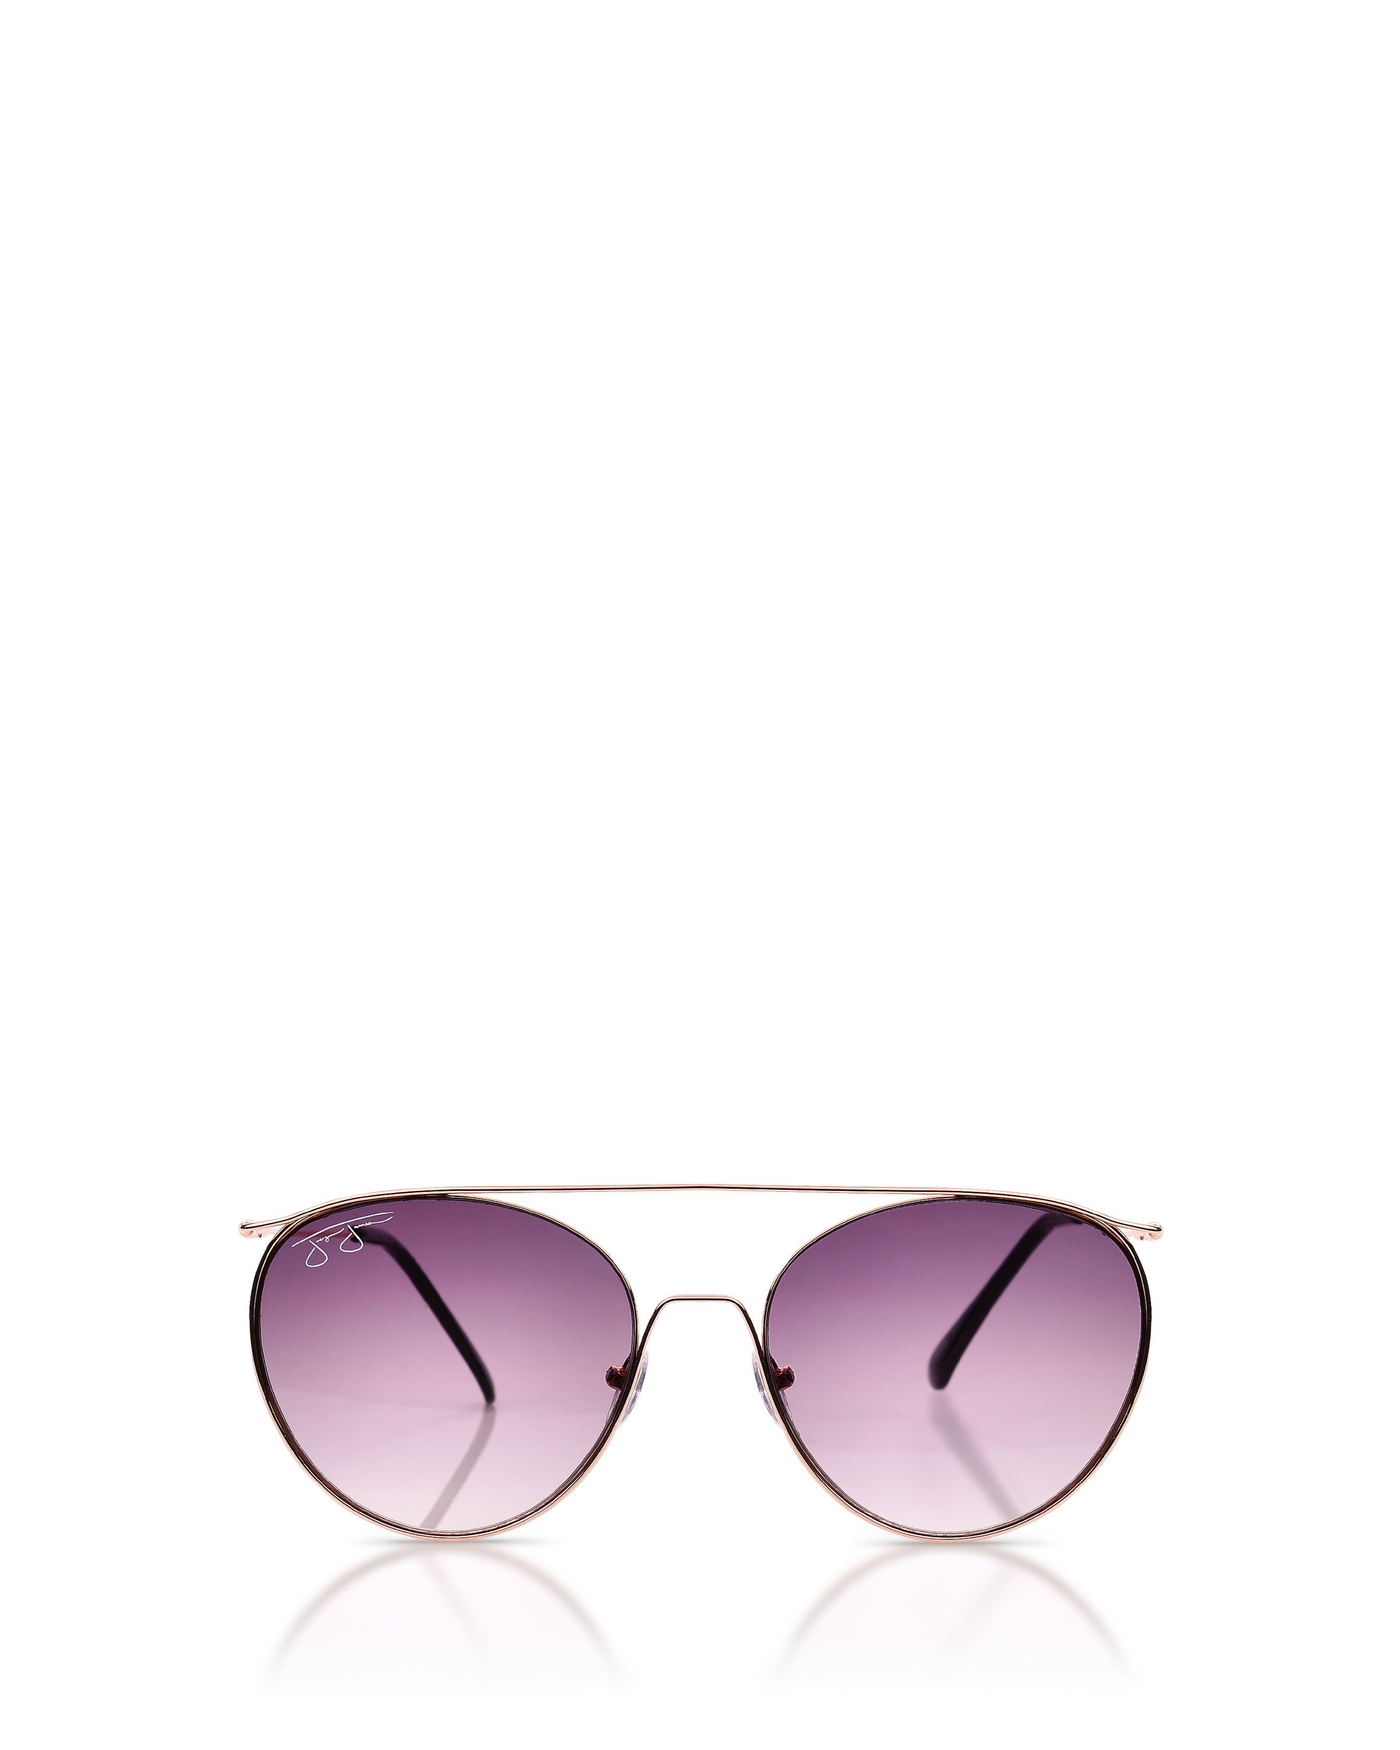 Round Aviator with Thin Crossbar Sunglasses - Gold Metal Frame with Plum Lens Sunglasses Joey James, The Label   